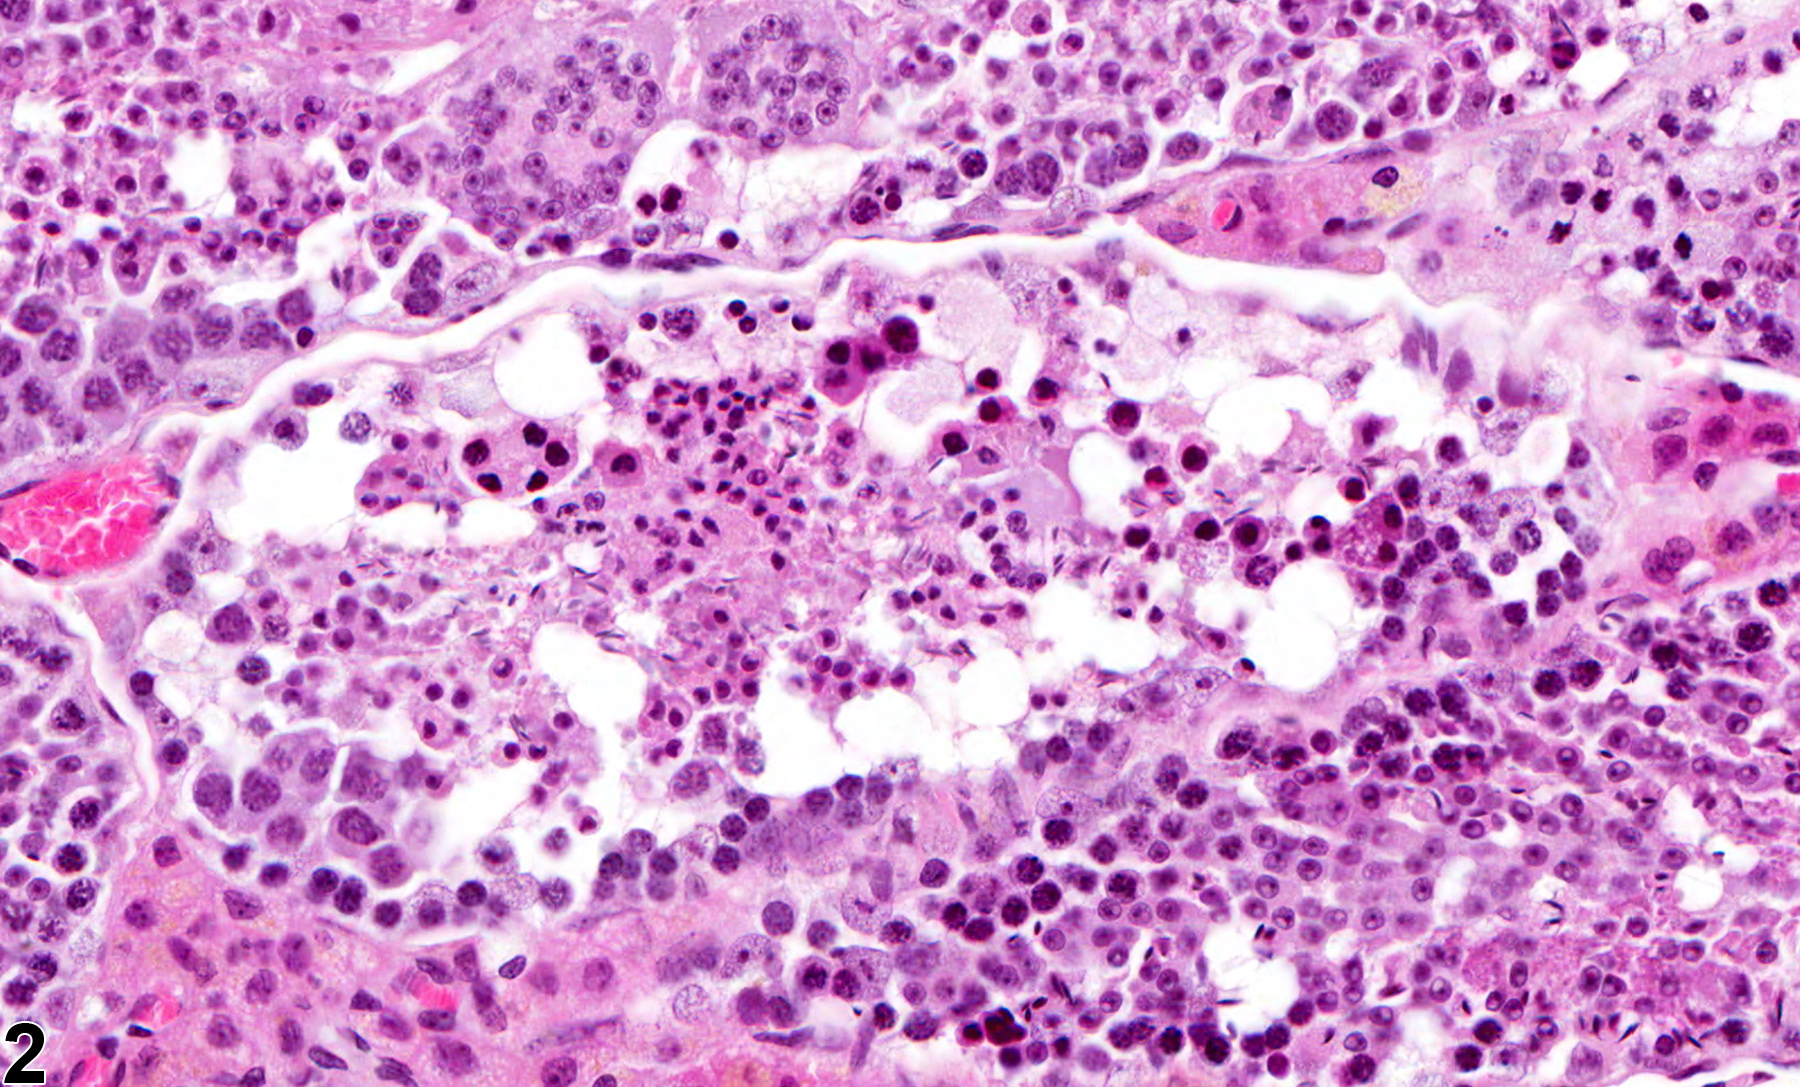 Image of seminiferous tubule necrosis in the testis from a male Swiss Webster mouse in a chronic study